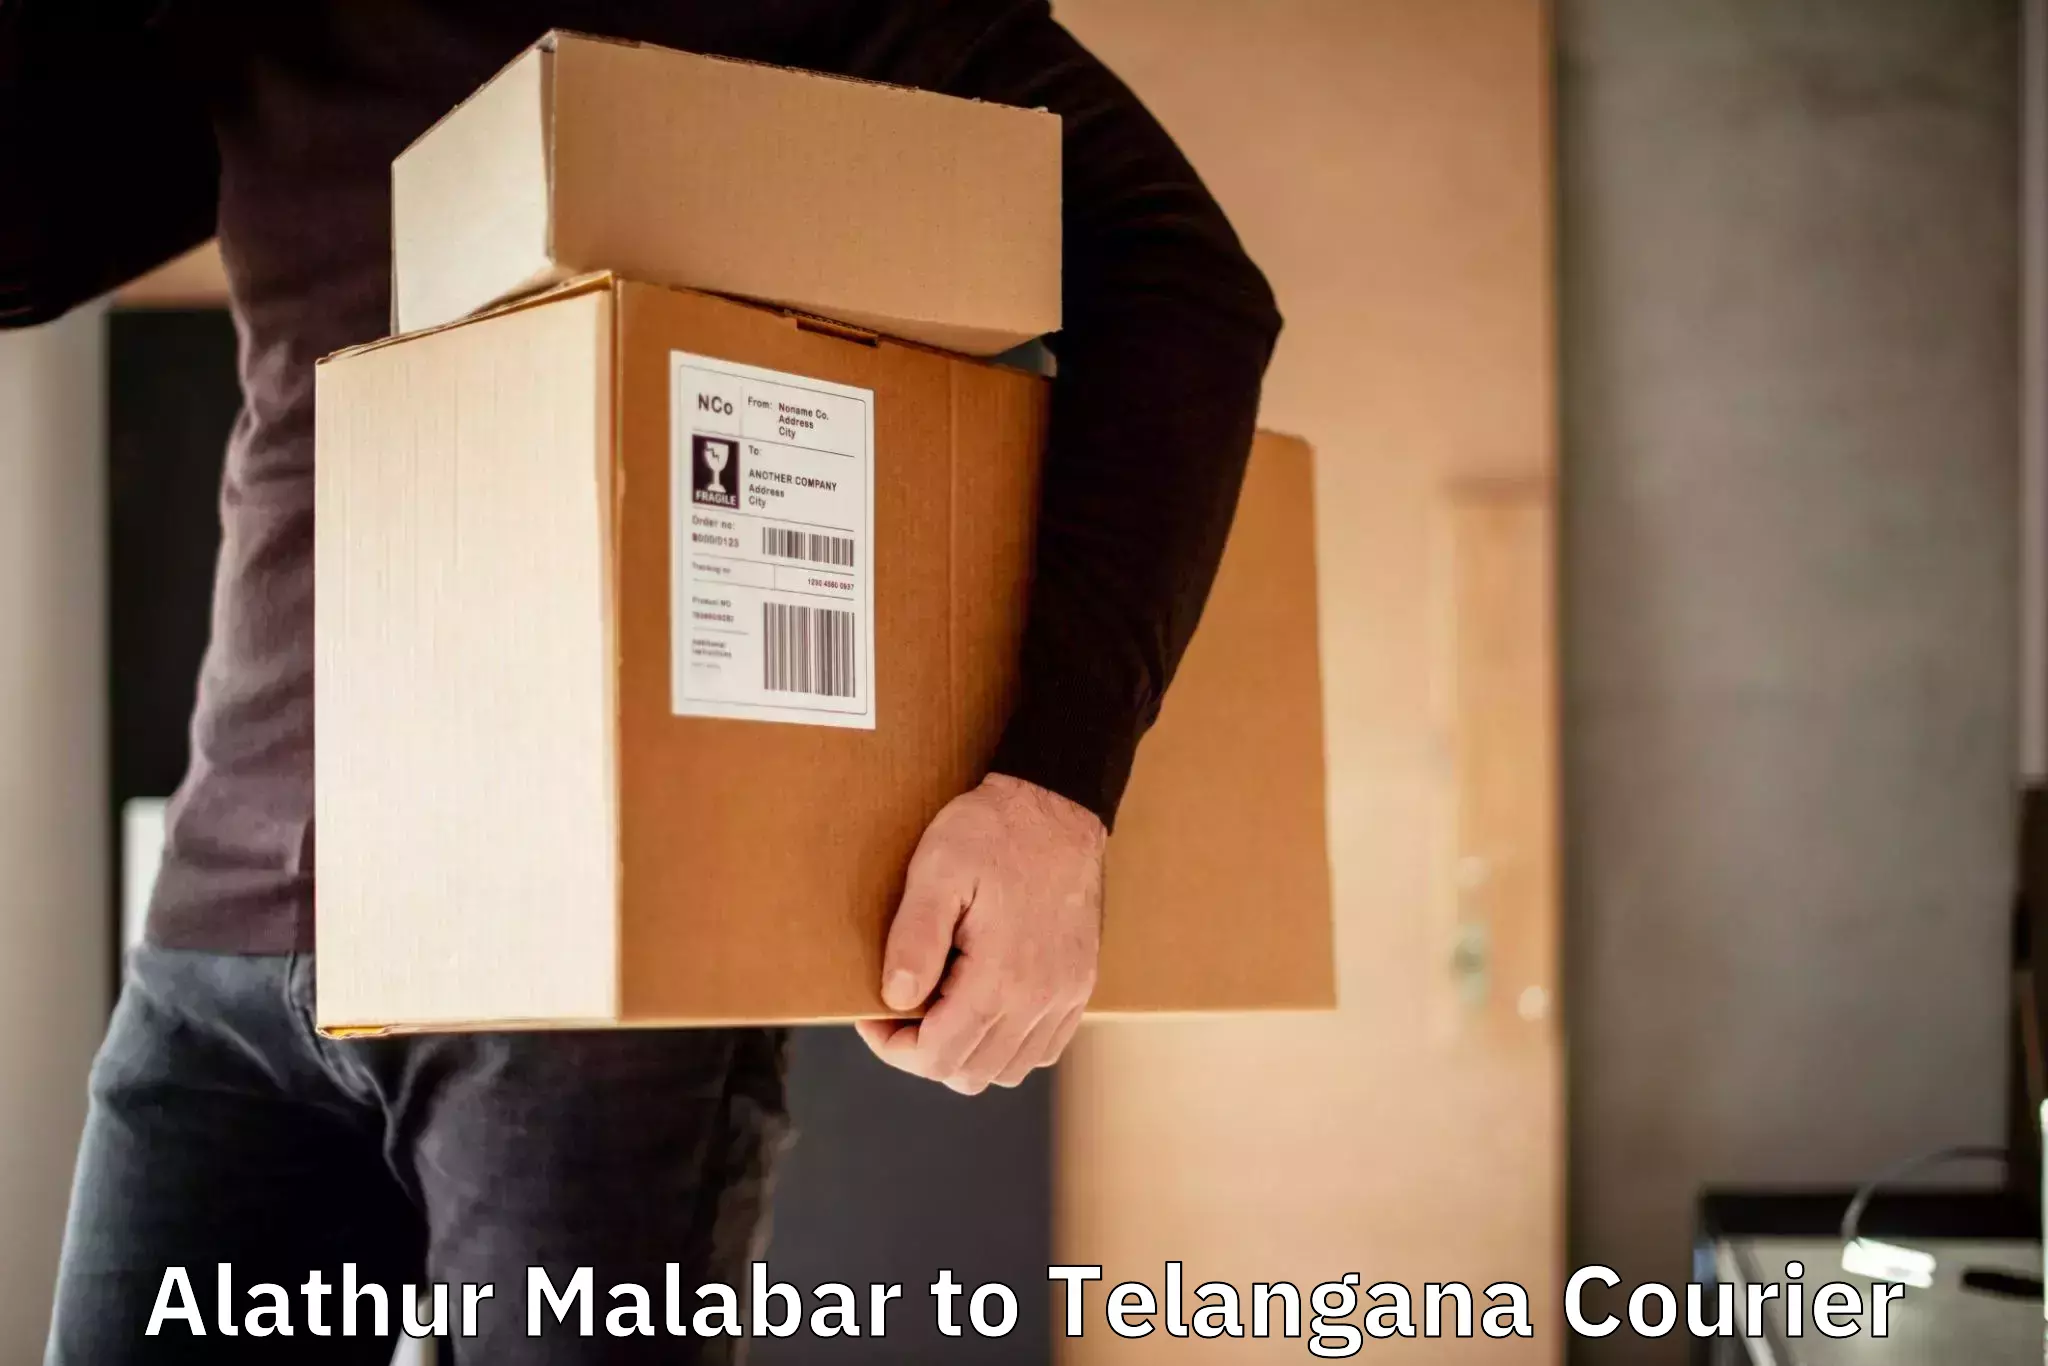 Multi-service courier options Alathur Malabar to Secunderabad